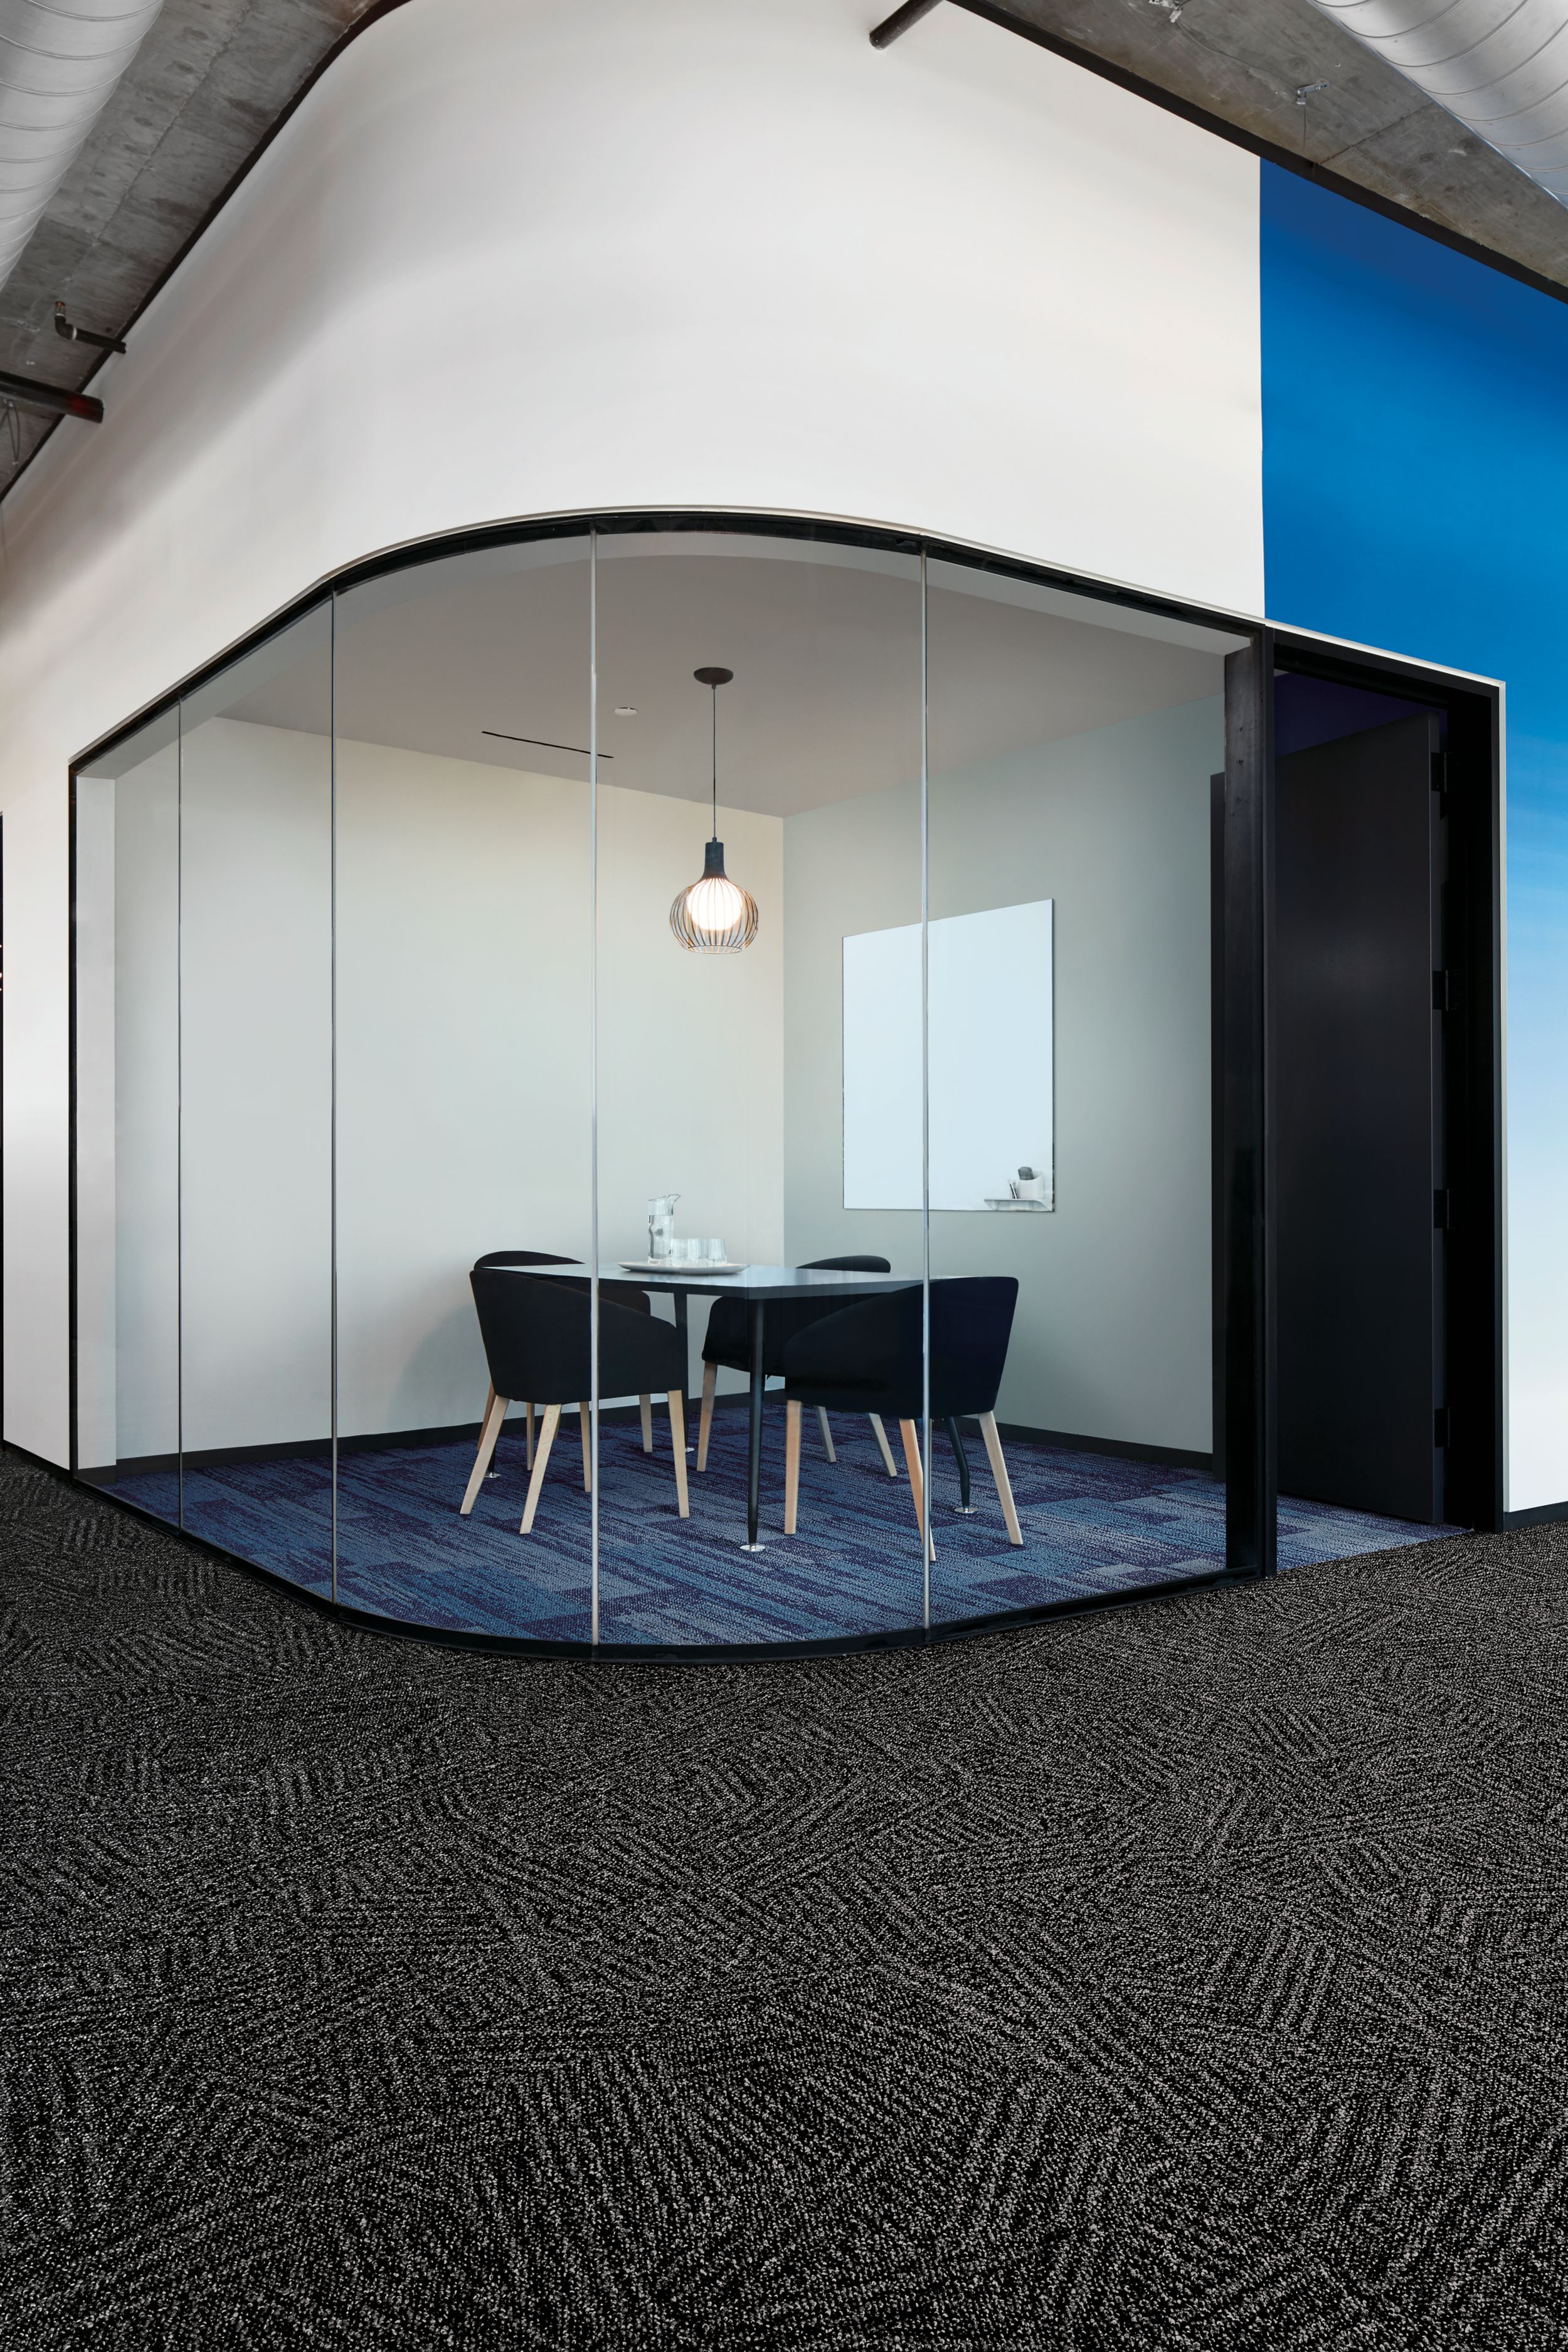 Interface AE317 plank carpet tile in enclosed meting room with Open Air 412 carpet tile in foreground imagen número 1